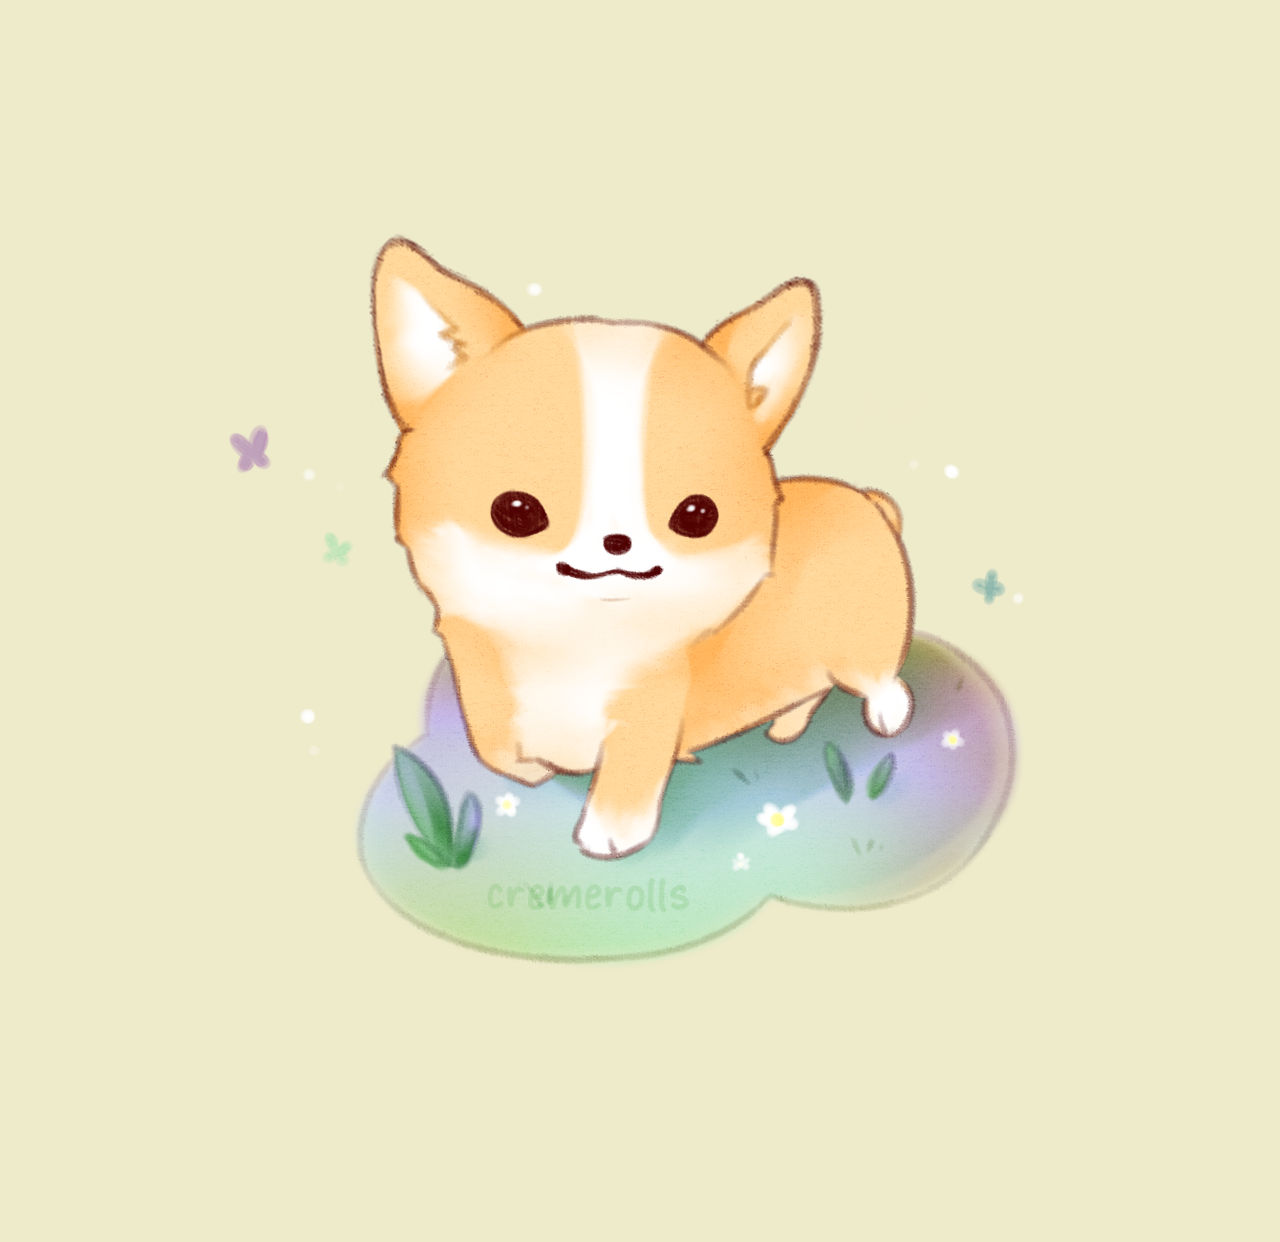 Corgi Background Images HD Pictures and Wallpaper For Free Download   Pngtree